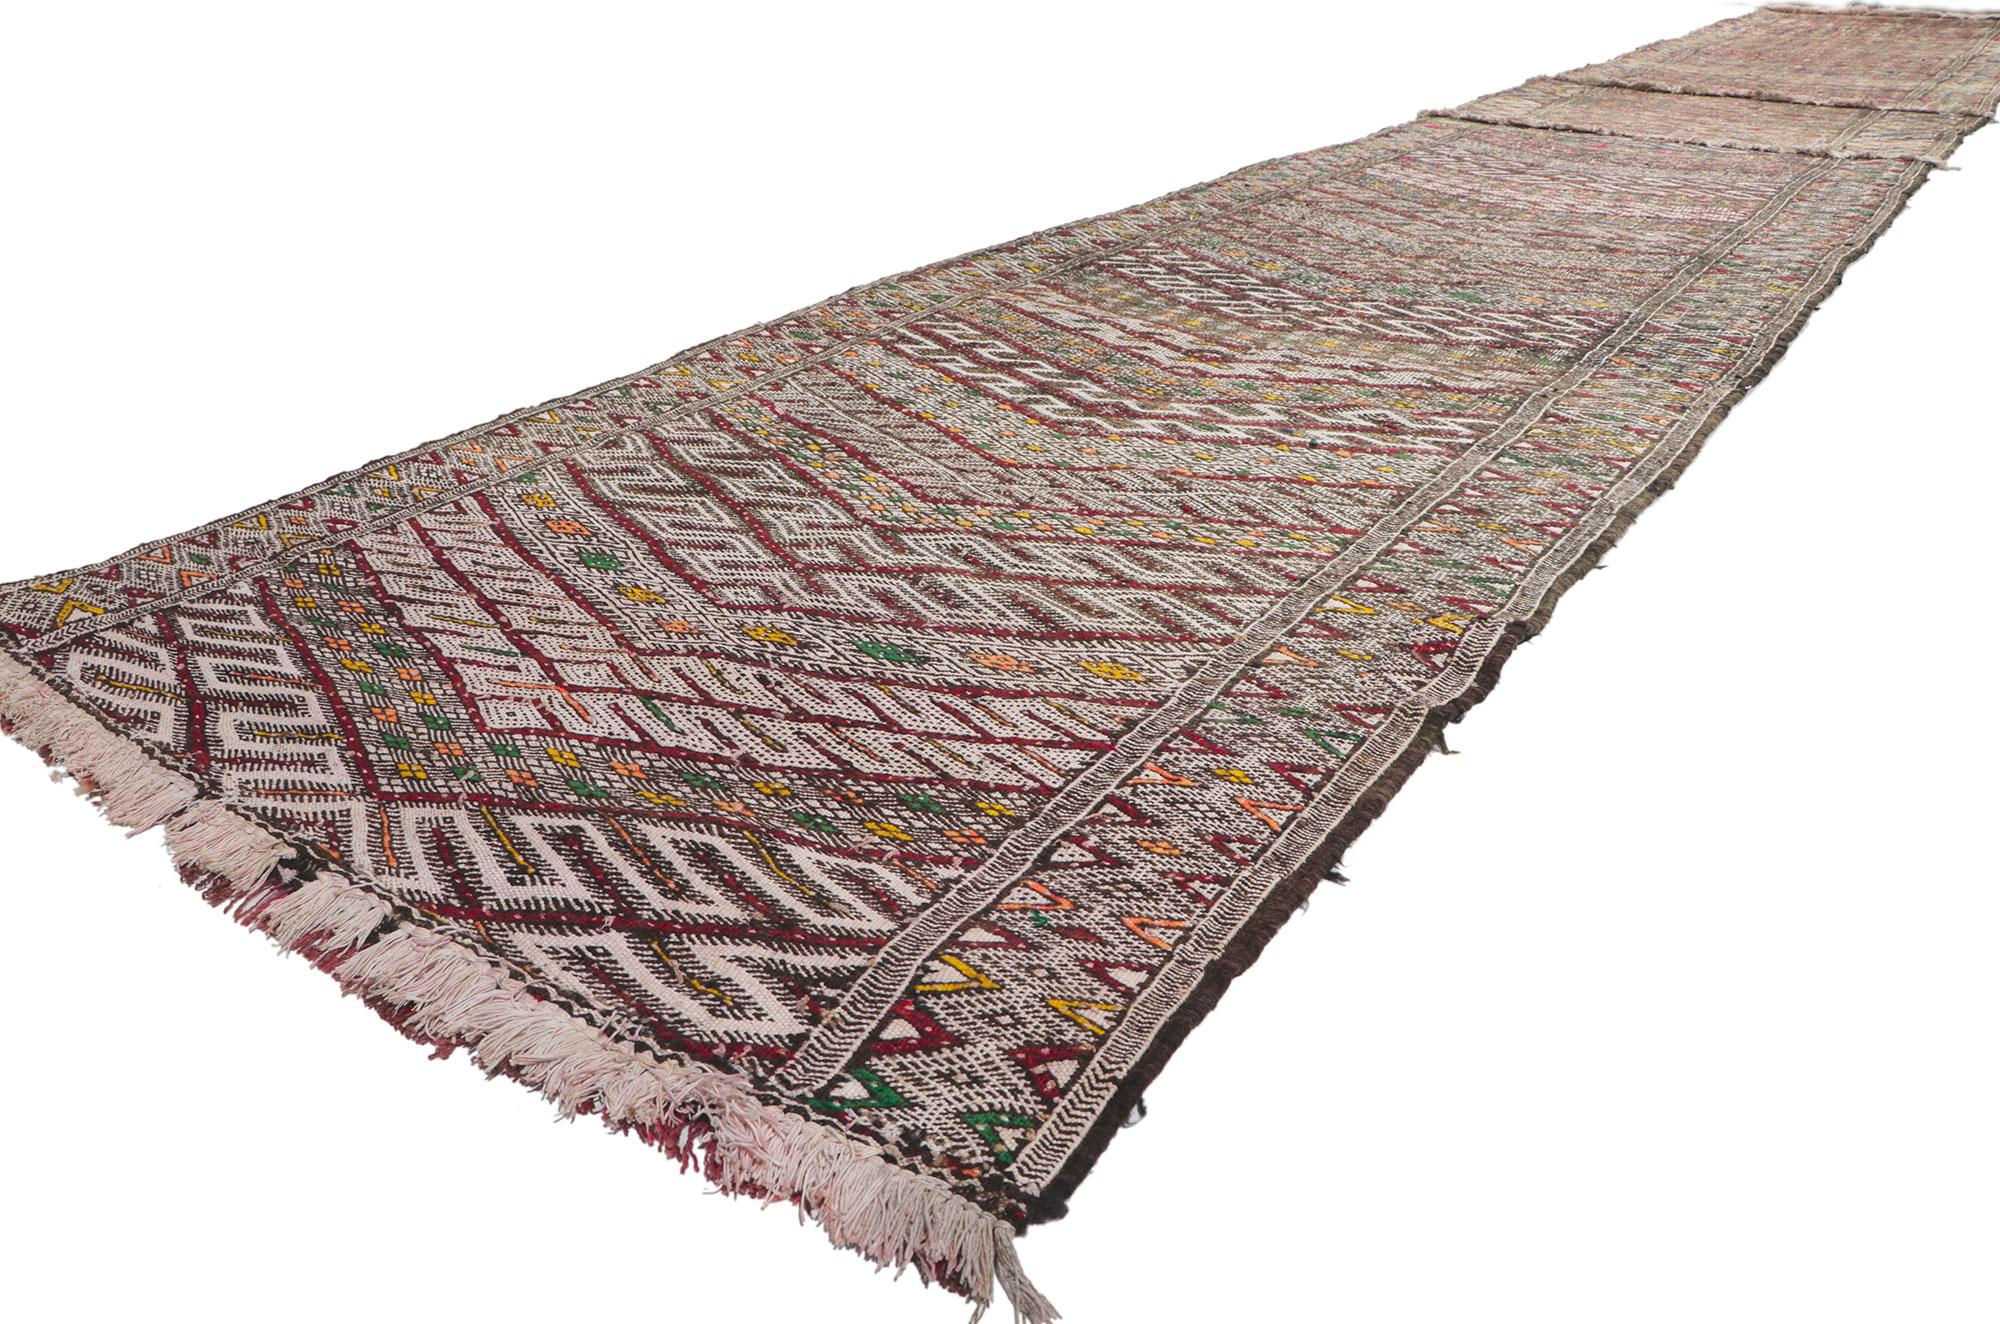 21705 Vintage Zemmour Moroccan Kilim Runner, 03'08 x 24'03. Full of tiny details and tribal style, this hand-woven wool vintage Zemmour Berber Moroccan kilim rug runner is a captivating vision of woven beauty. The abrashed field is composed of